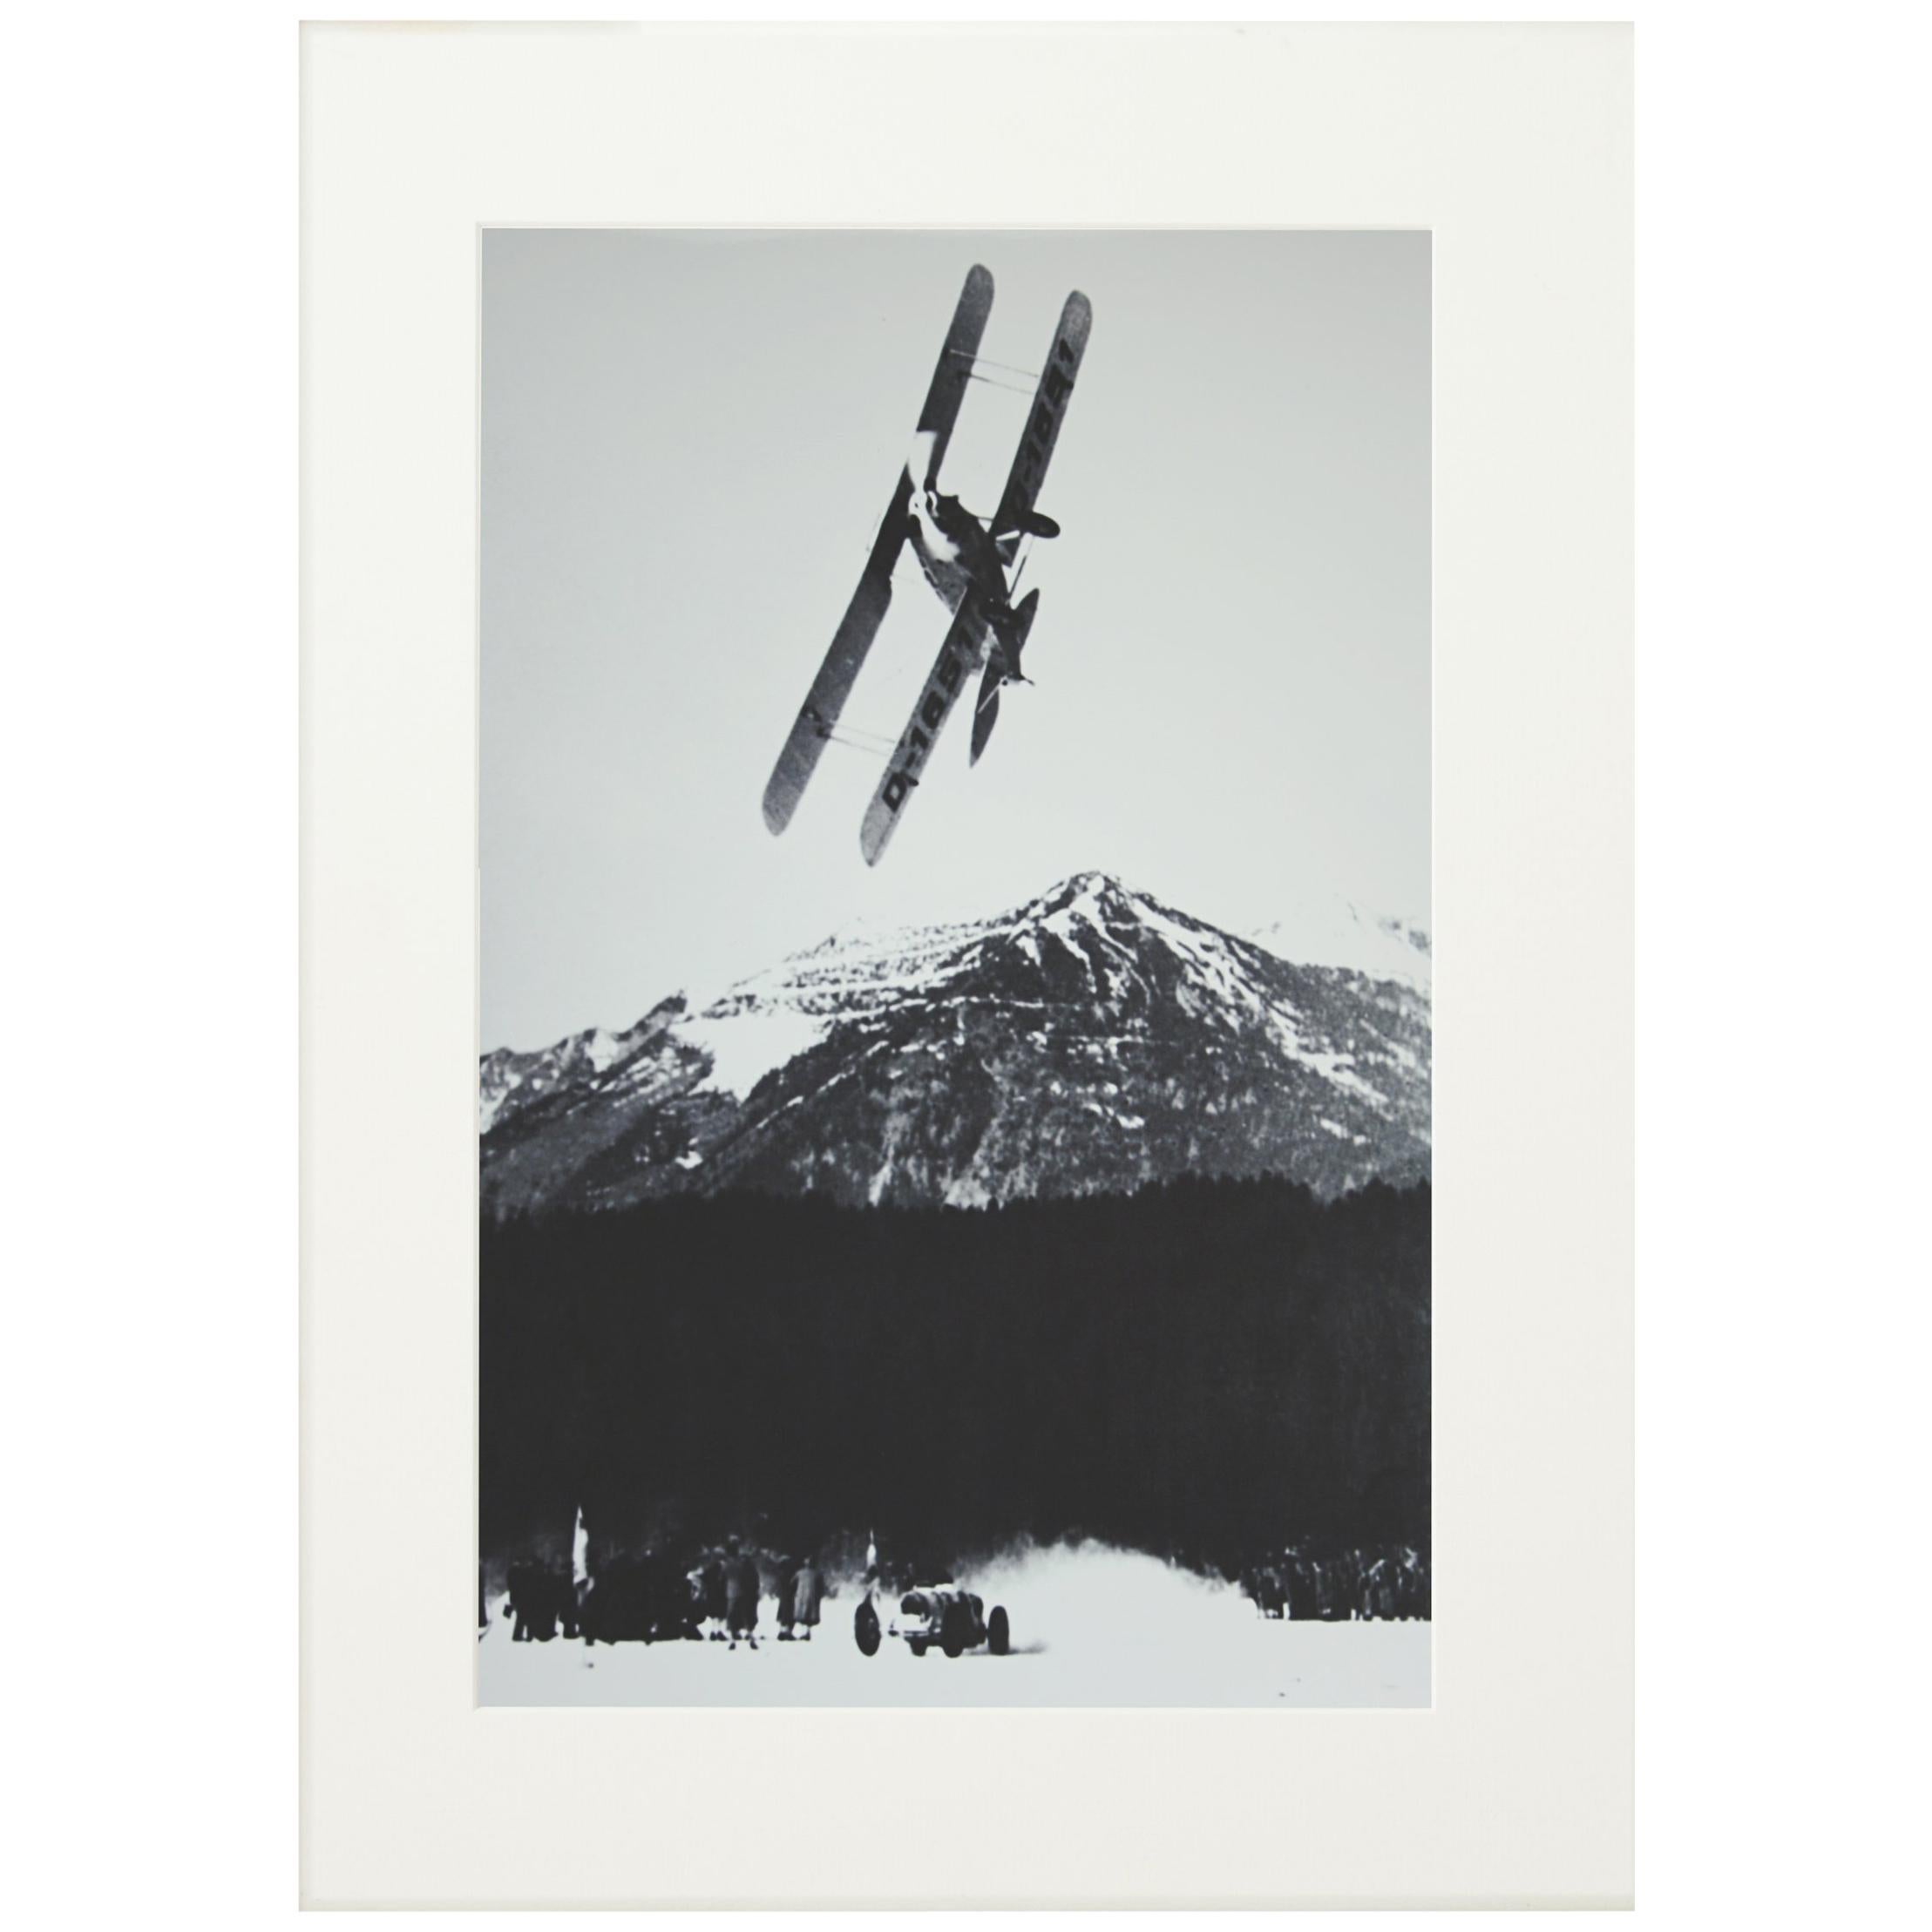 British Vintage Style Photography, Framed Alpine Ski Photograph, The Race For Sale